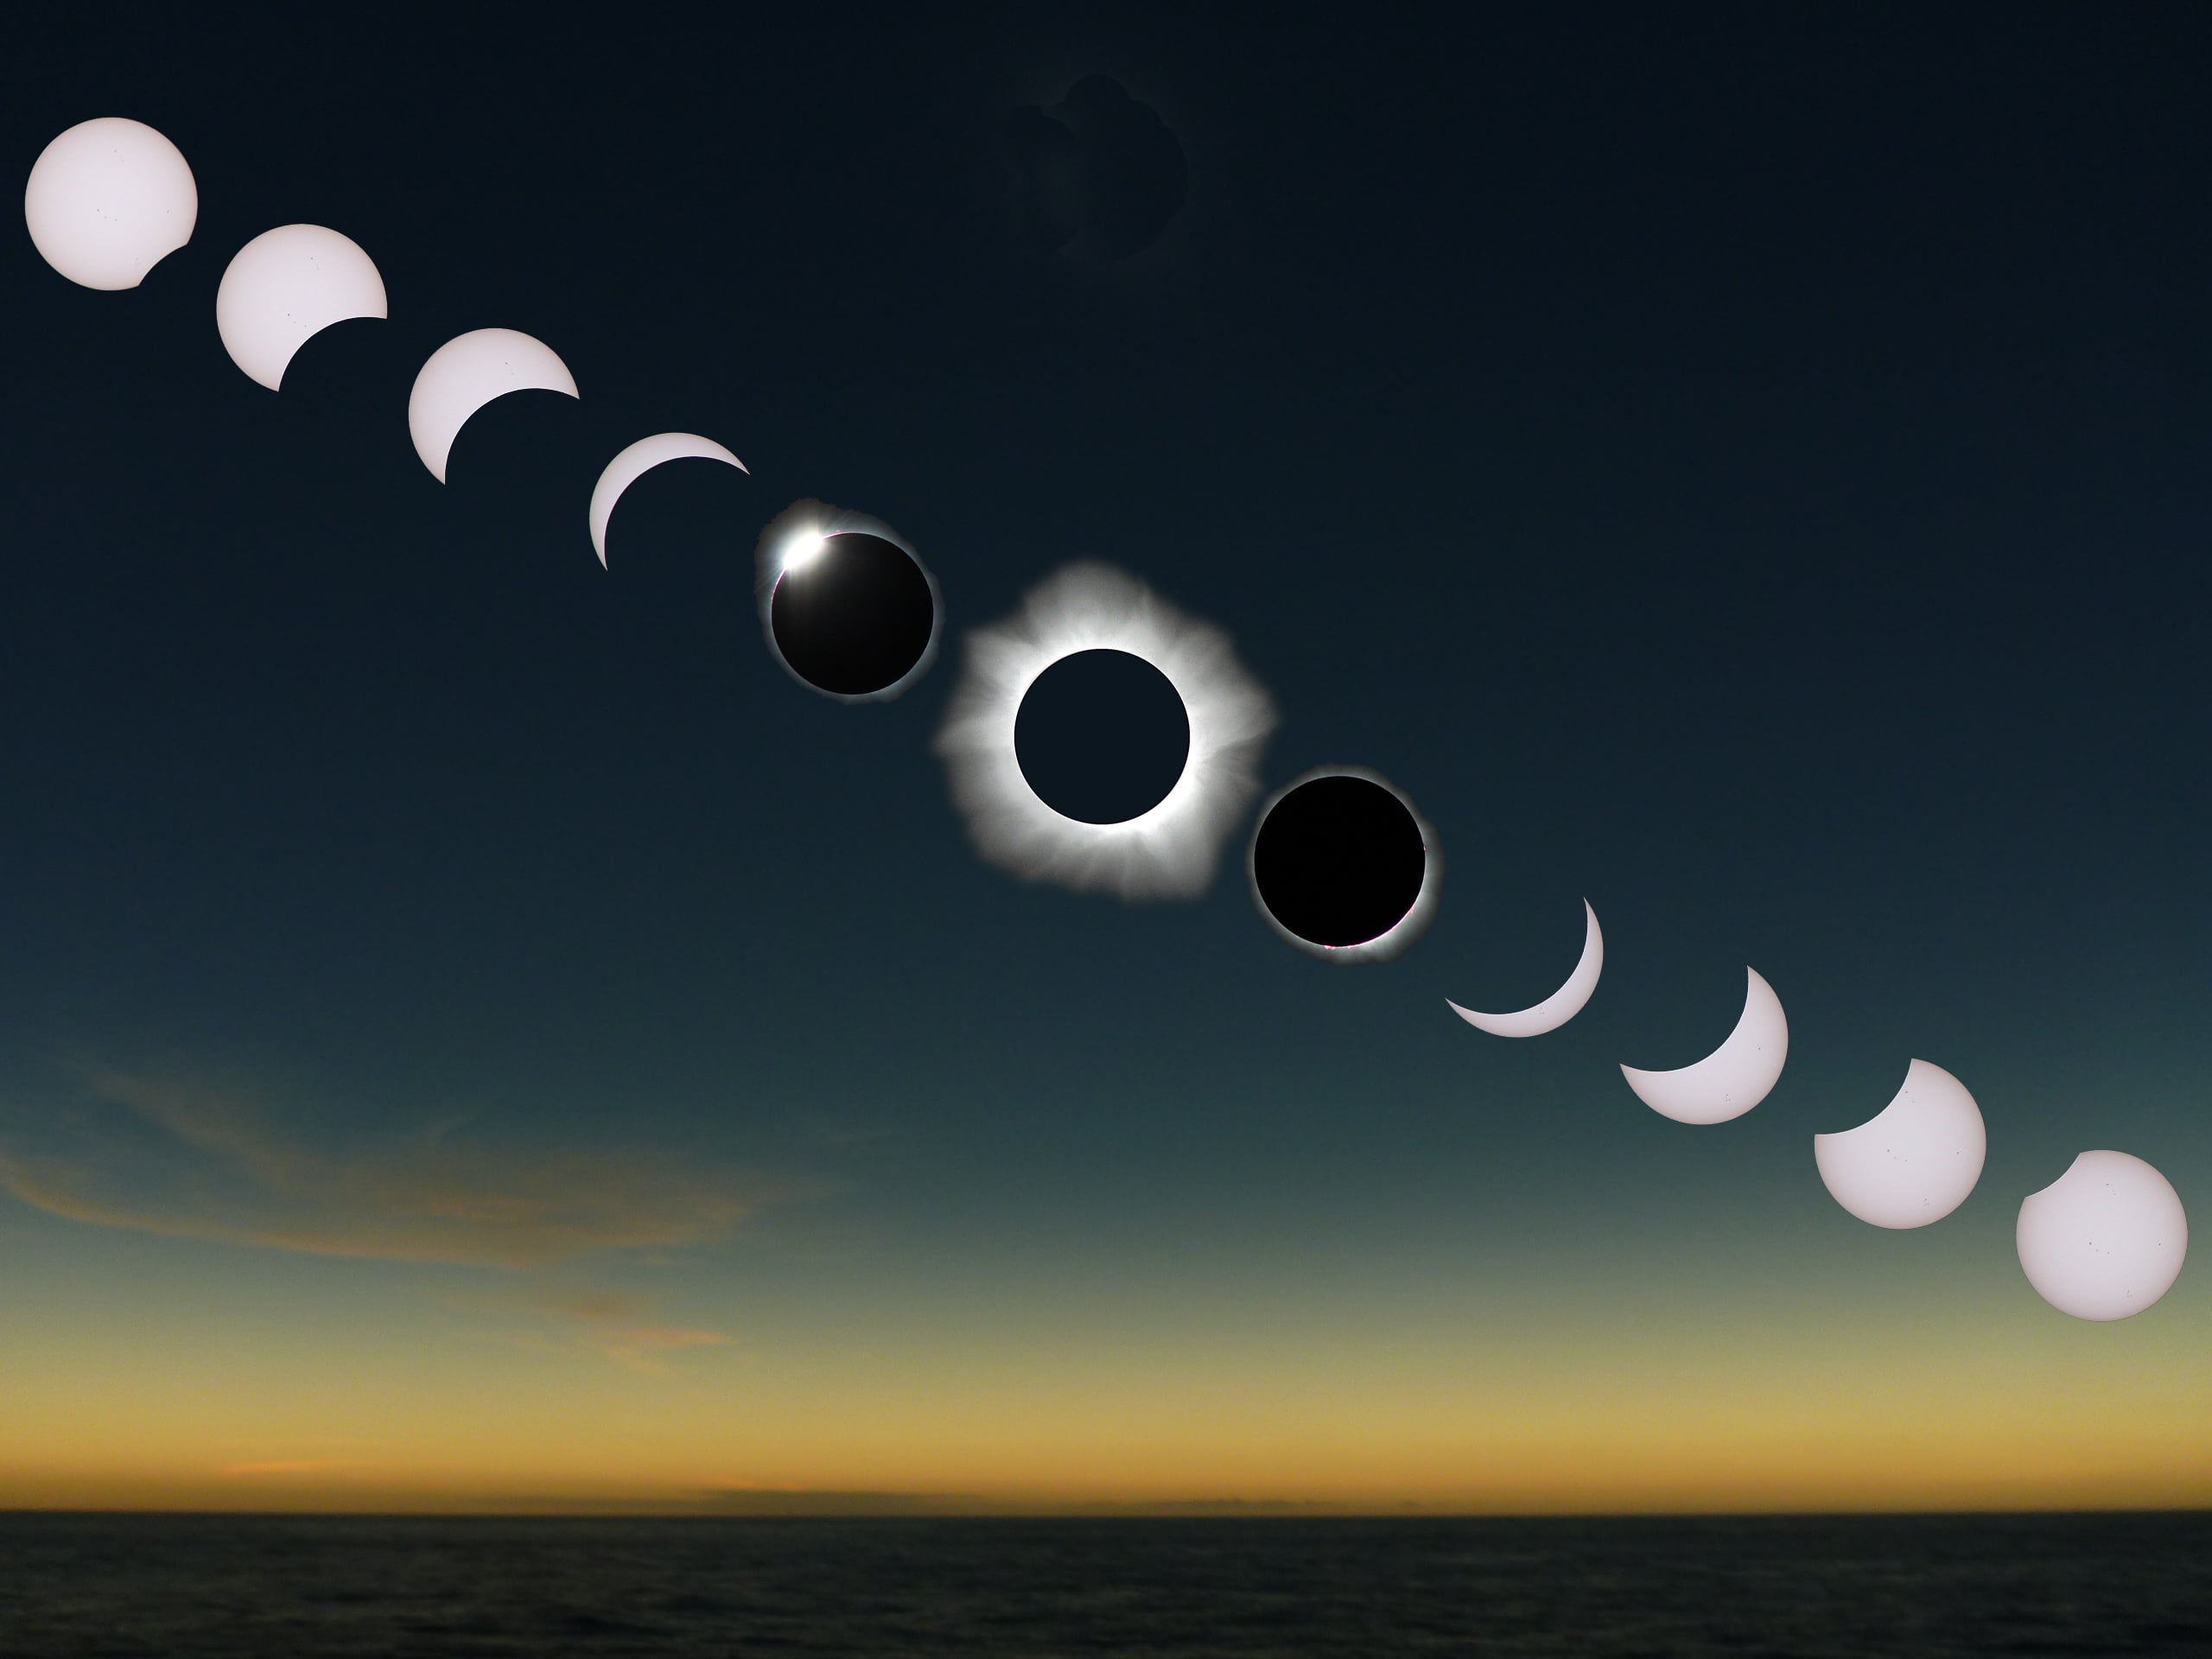 How Does A Solar Eclipse Occur?